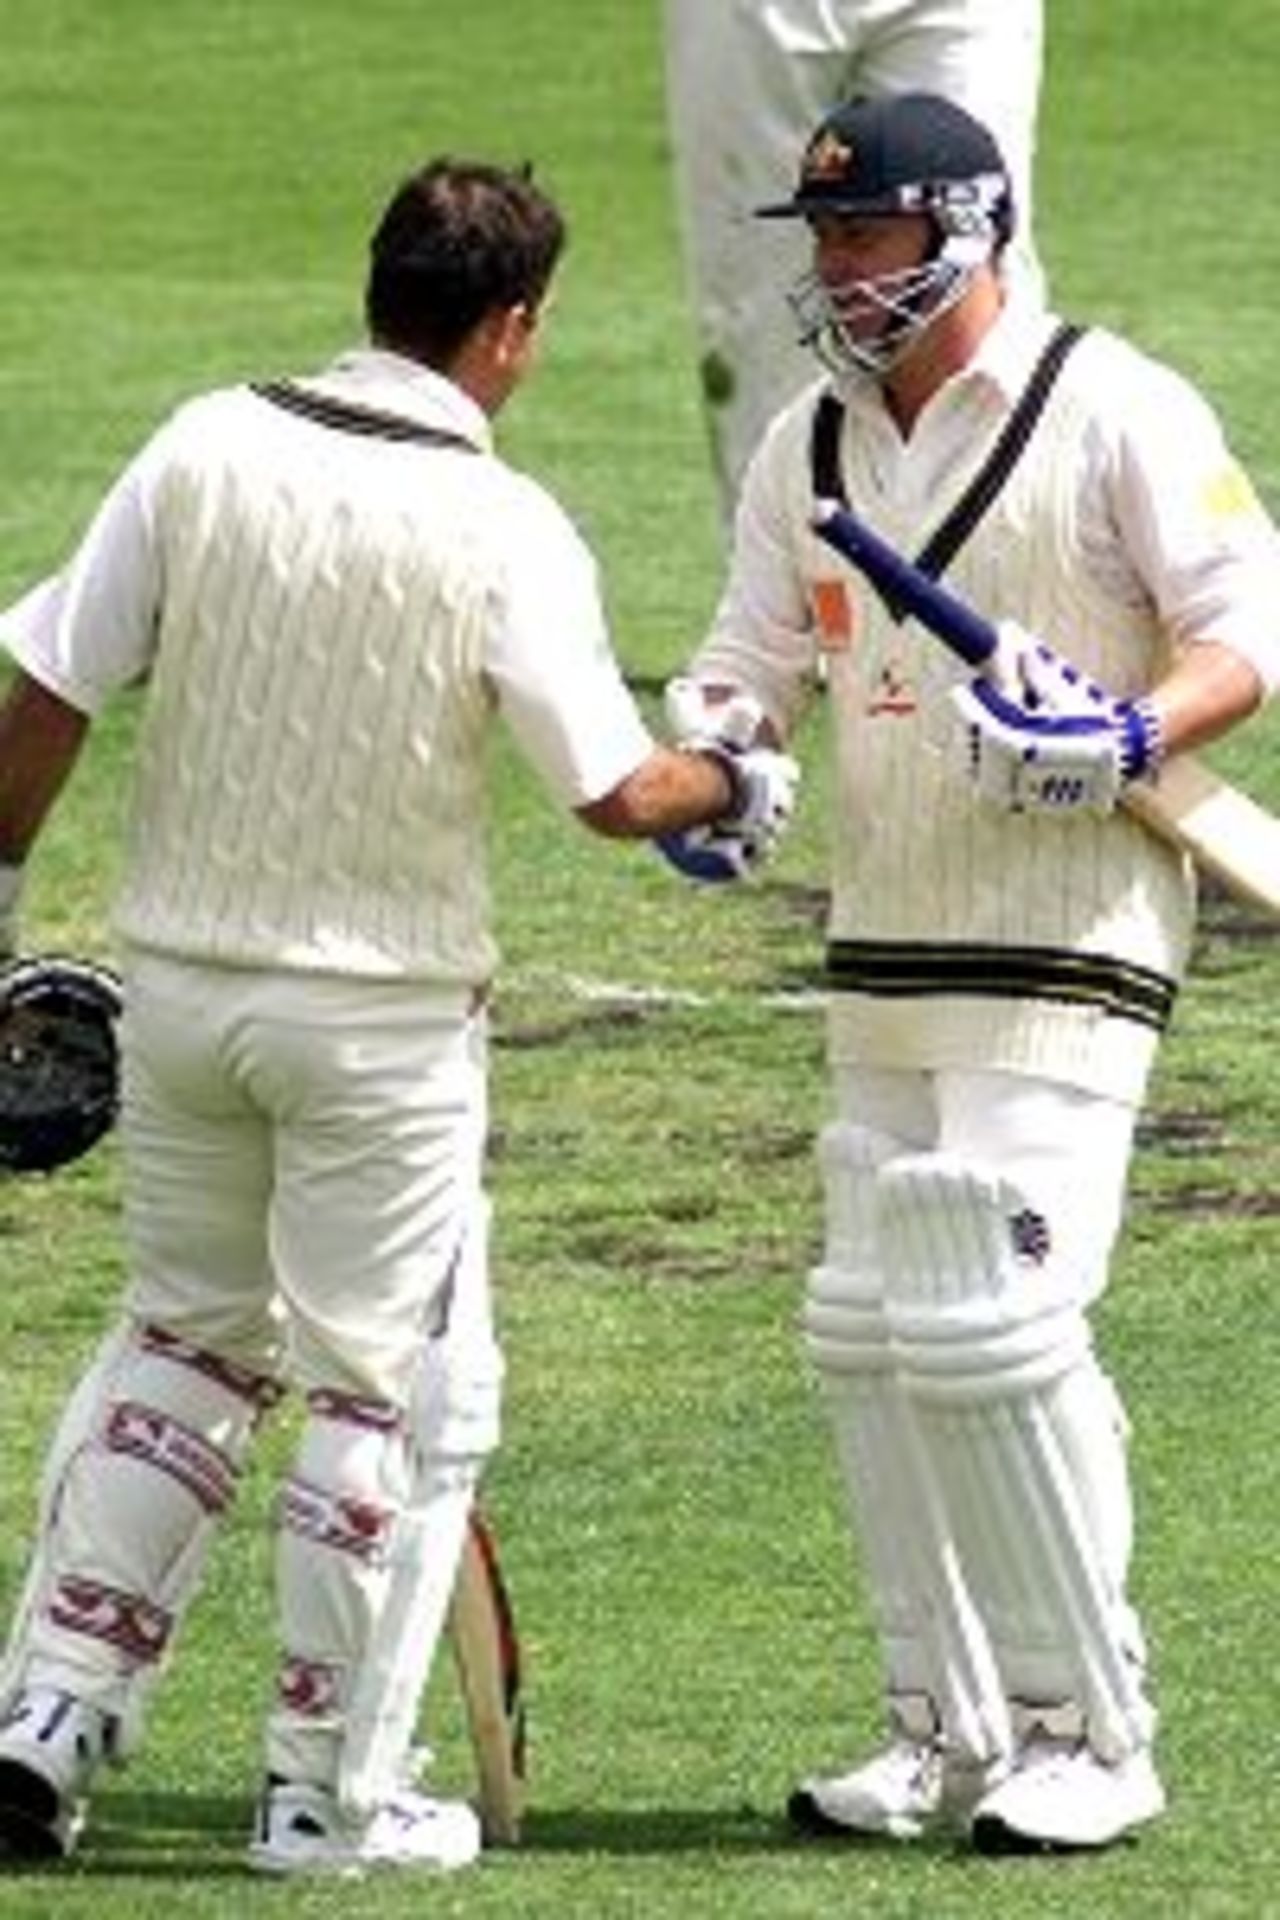 23 Nov 2001: Ricky Ponting of Australia is congratulated by team mate Shane Warne on his century during day two of the second test between Australia and New Zealand played at Bellerive Oval, Hobart, Australia.